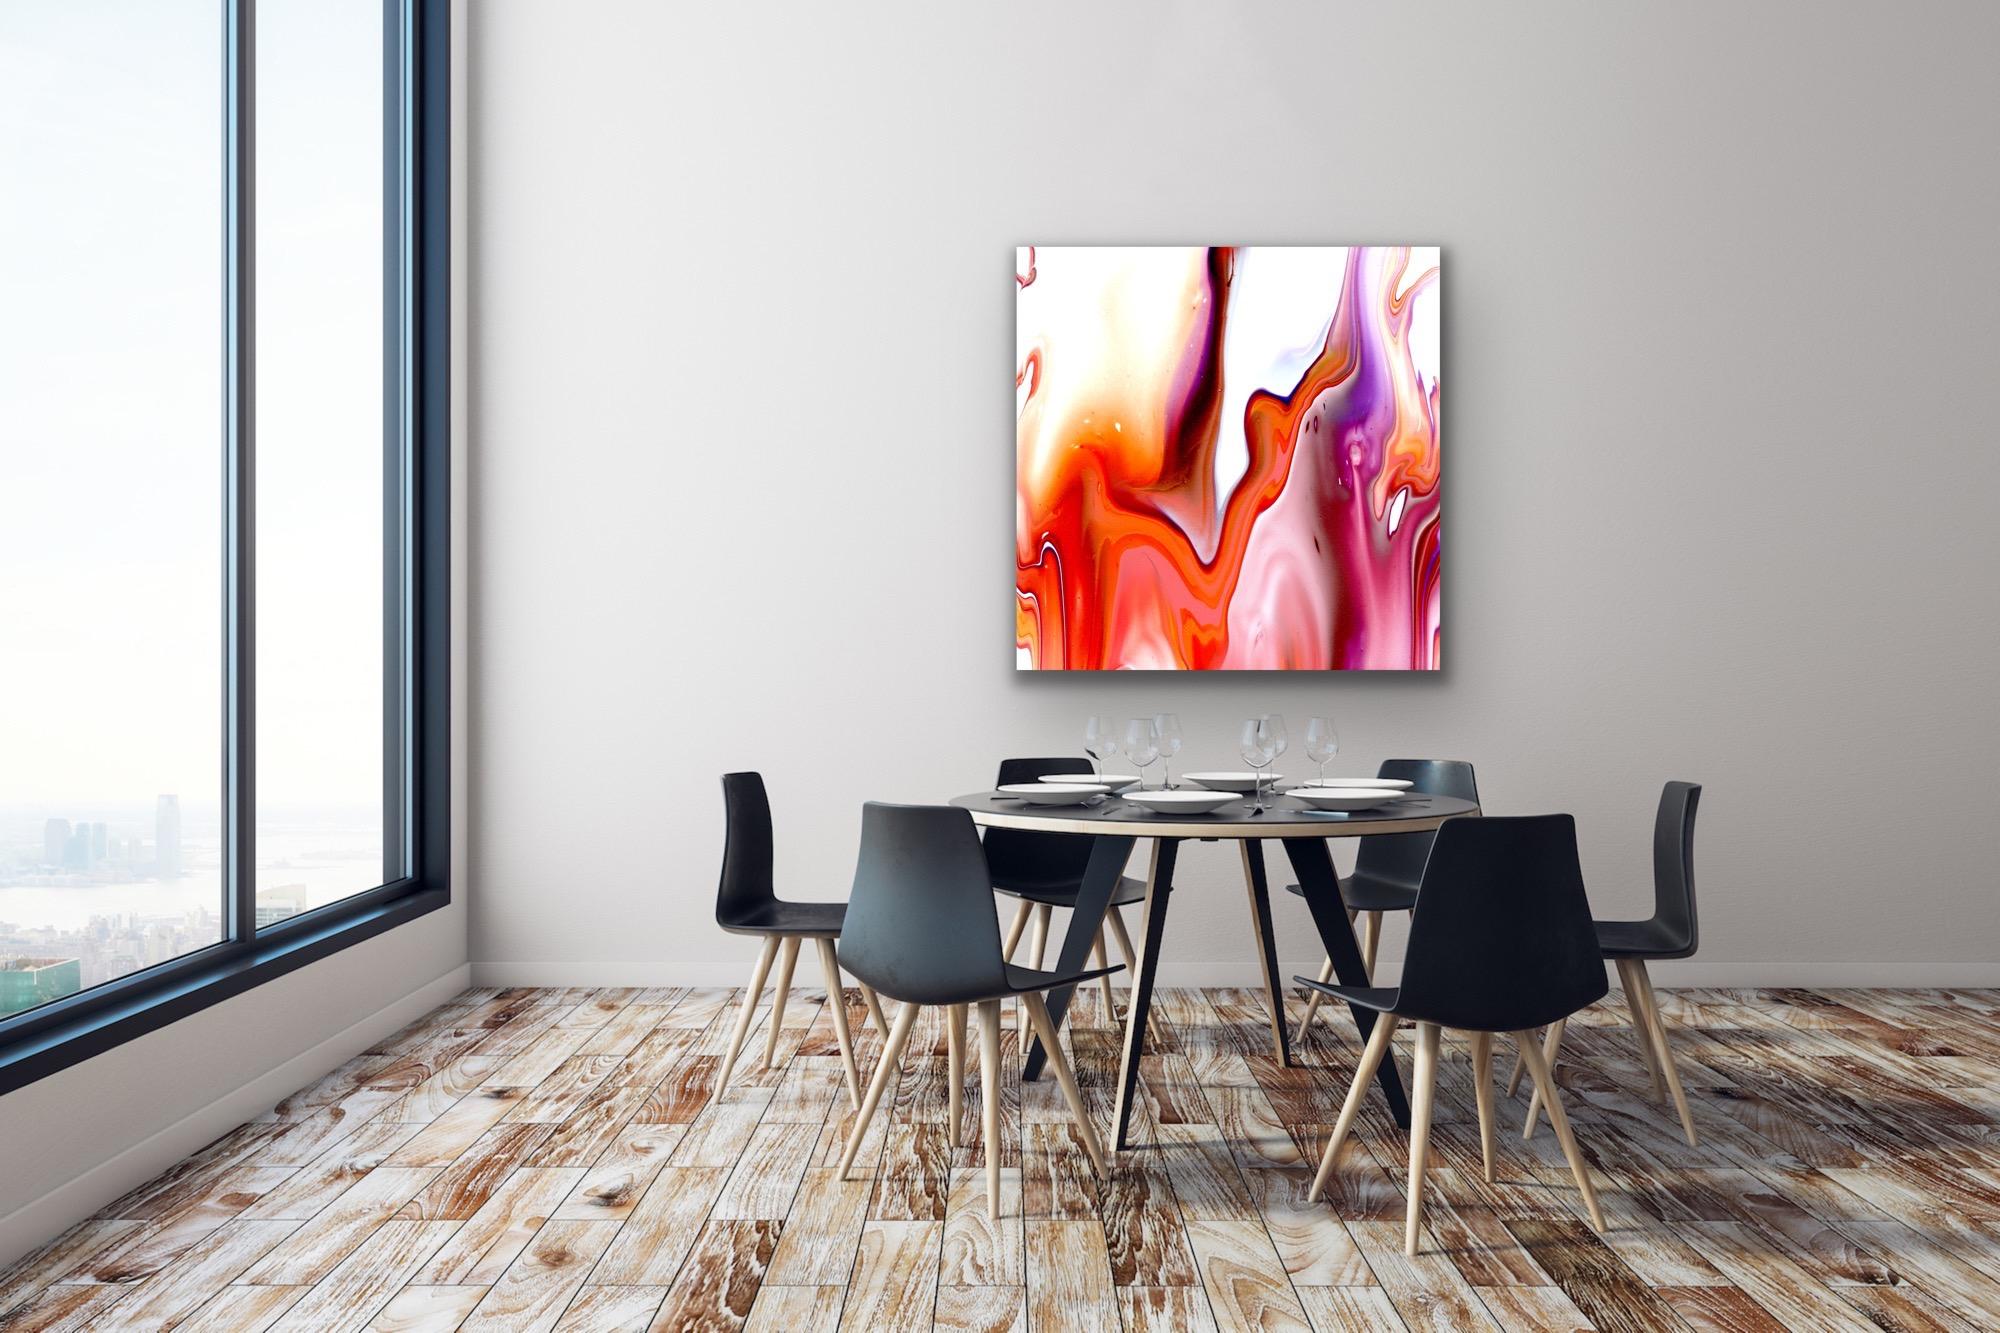 This contemporary modern abstract painting is printed on a lightweight metal composite and comes ready to hang. This vibrant composition can be hung both indoor and outdoor as it is weather resistant.

-Title: Madden
-Artist: Celeste Reiter
-Limited